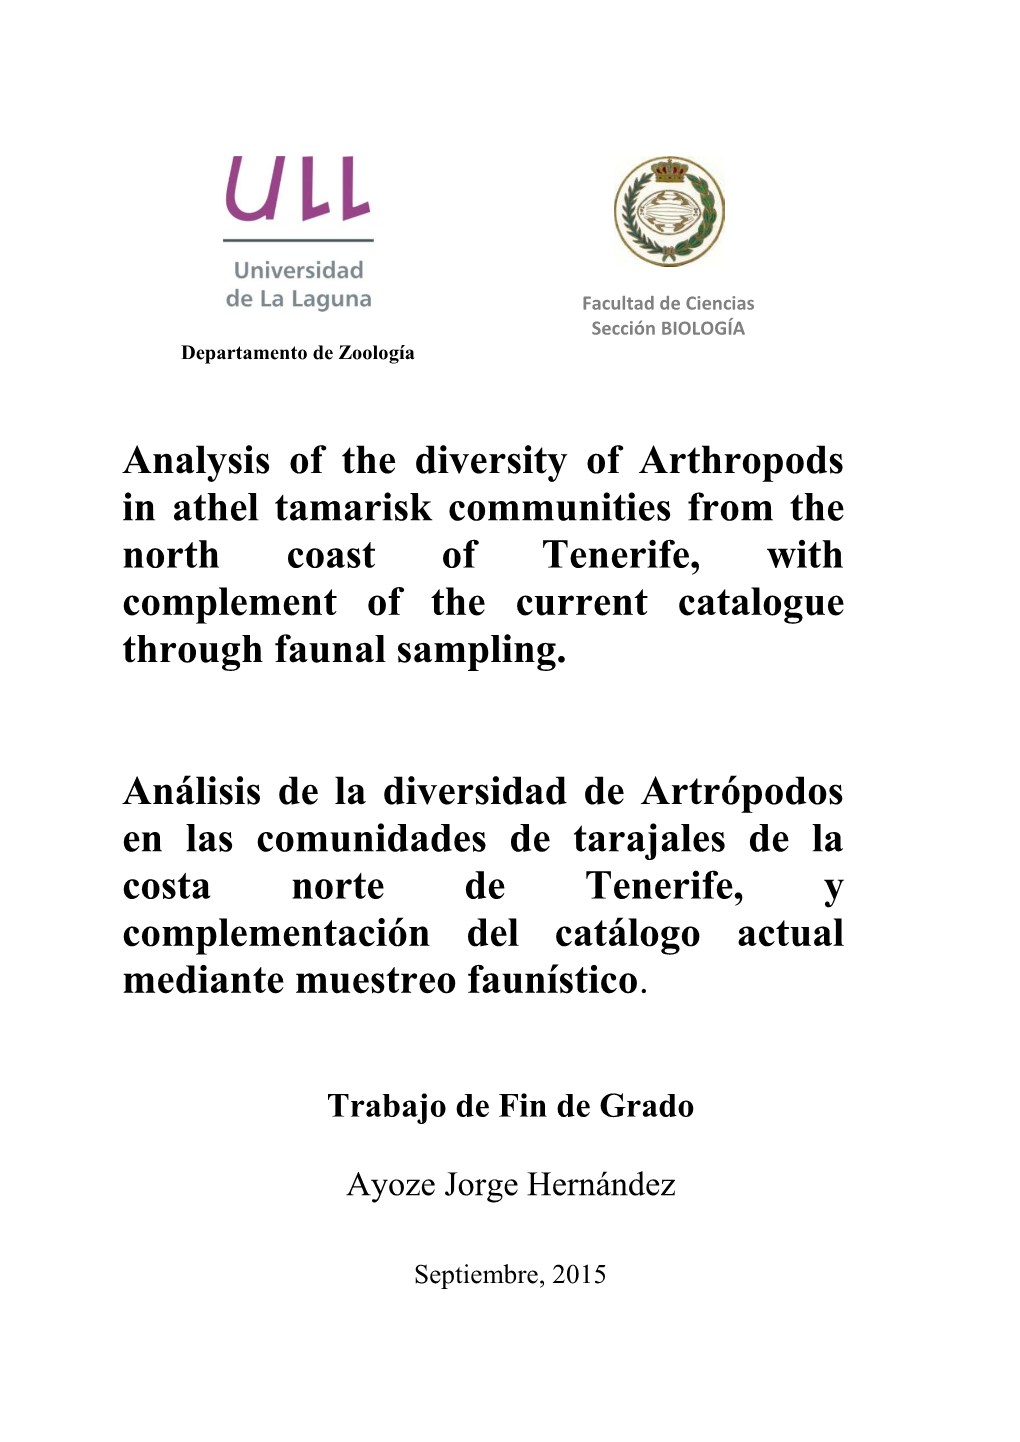 Analysis of the Diversity of Arthropods in Athel Tamarisk Communities From